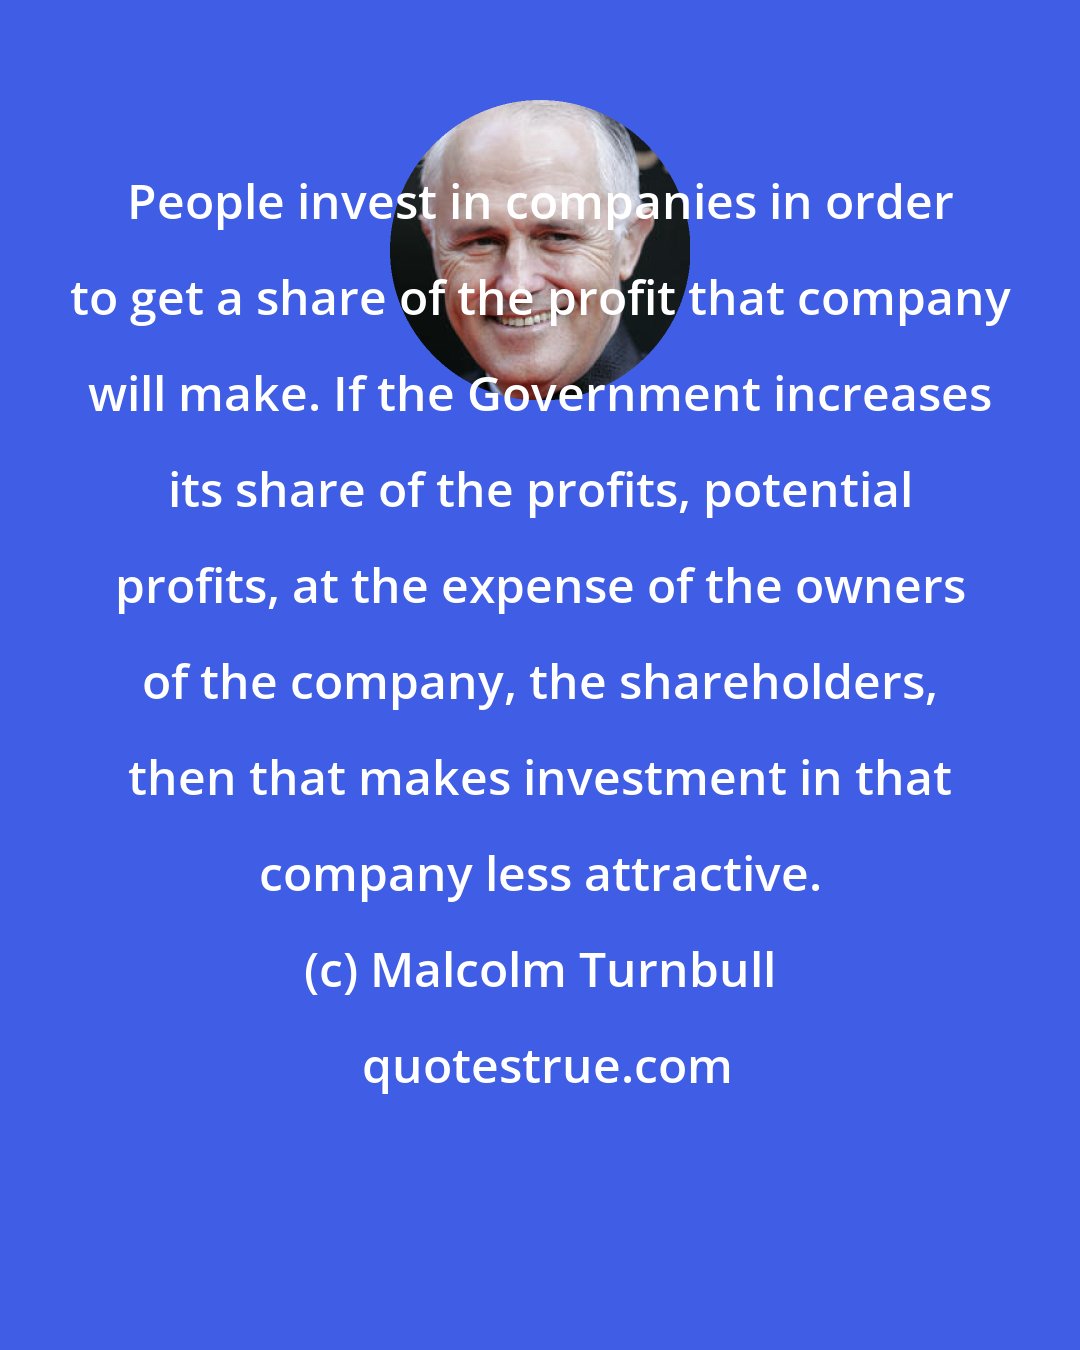 Malcolm Turnbull: People invest in companies in order to get a share of the profit that company will make. If the Government increases its share of the profits, potential profits, at the expense of the owners of the company, the shareholders, then that makes investment in that company less attractive.